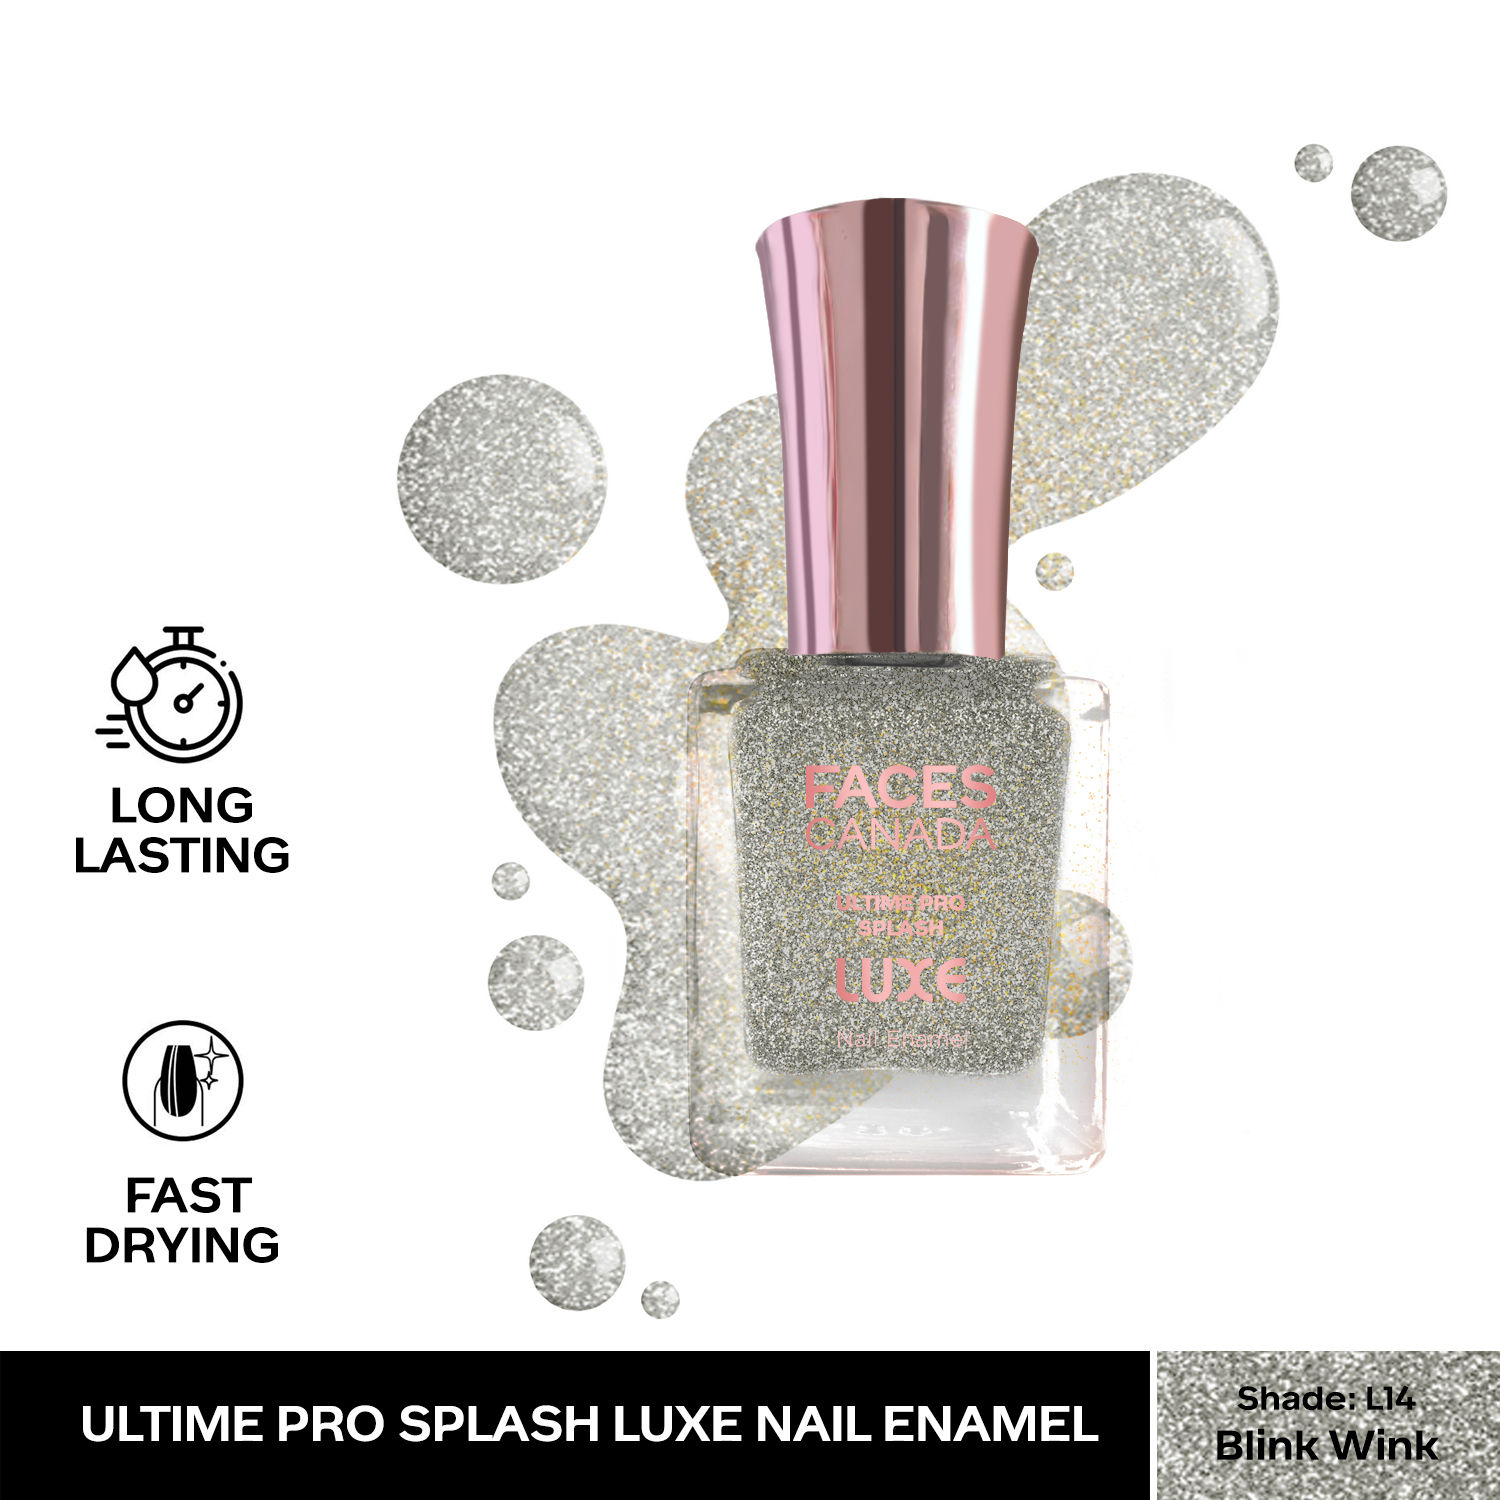 Buy FACES CANADA Ultime Pro Splash Luxe Nail Enamel - Blink Wink (L14), 12ml | Glossy Finish | Quick Drying | Long Lasting | High Shine | Chip Defiant | Even-Finish | Vegan | Non-Toxic | Ethanol-Free - Purplle